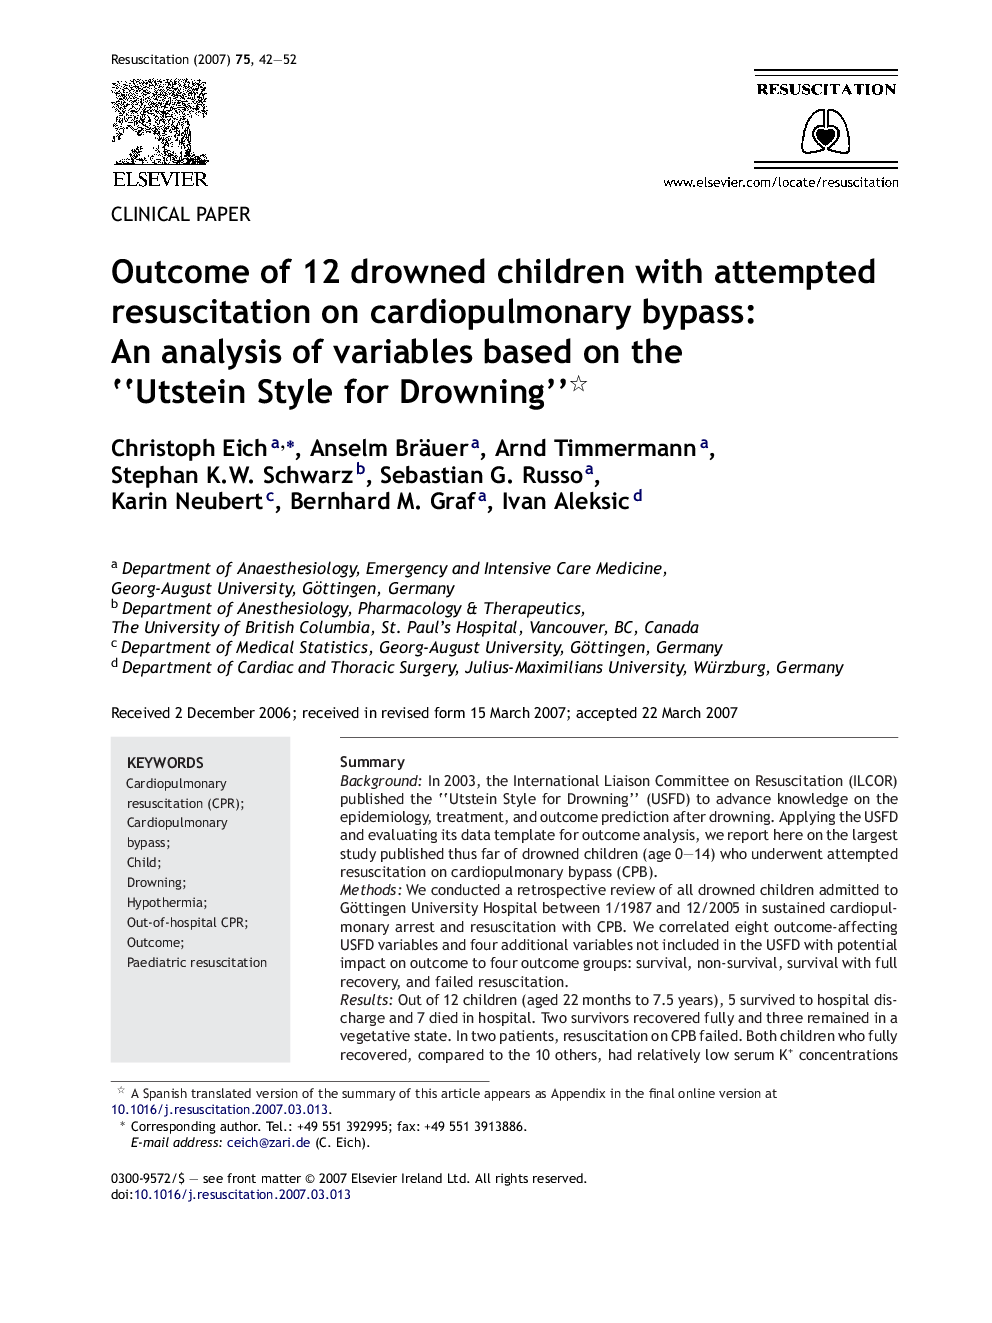 Outcome of 12 drowned children with attempted resuscitation on cardiopulmonary bypass: An analysis of variables based on the “Utstein Style for Drowning” 